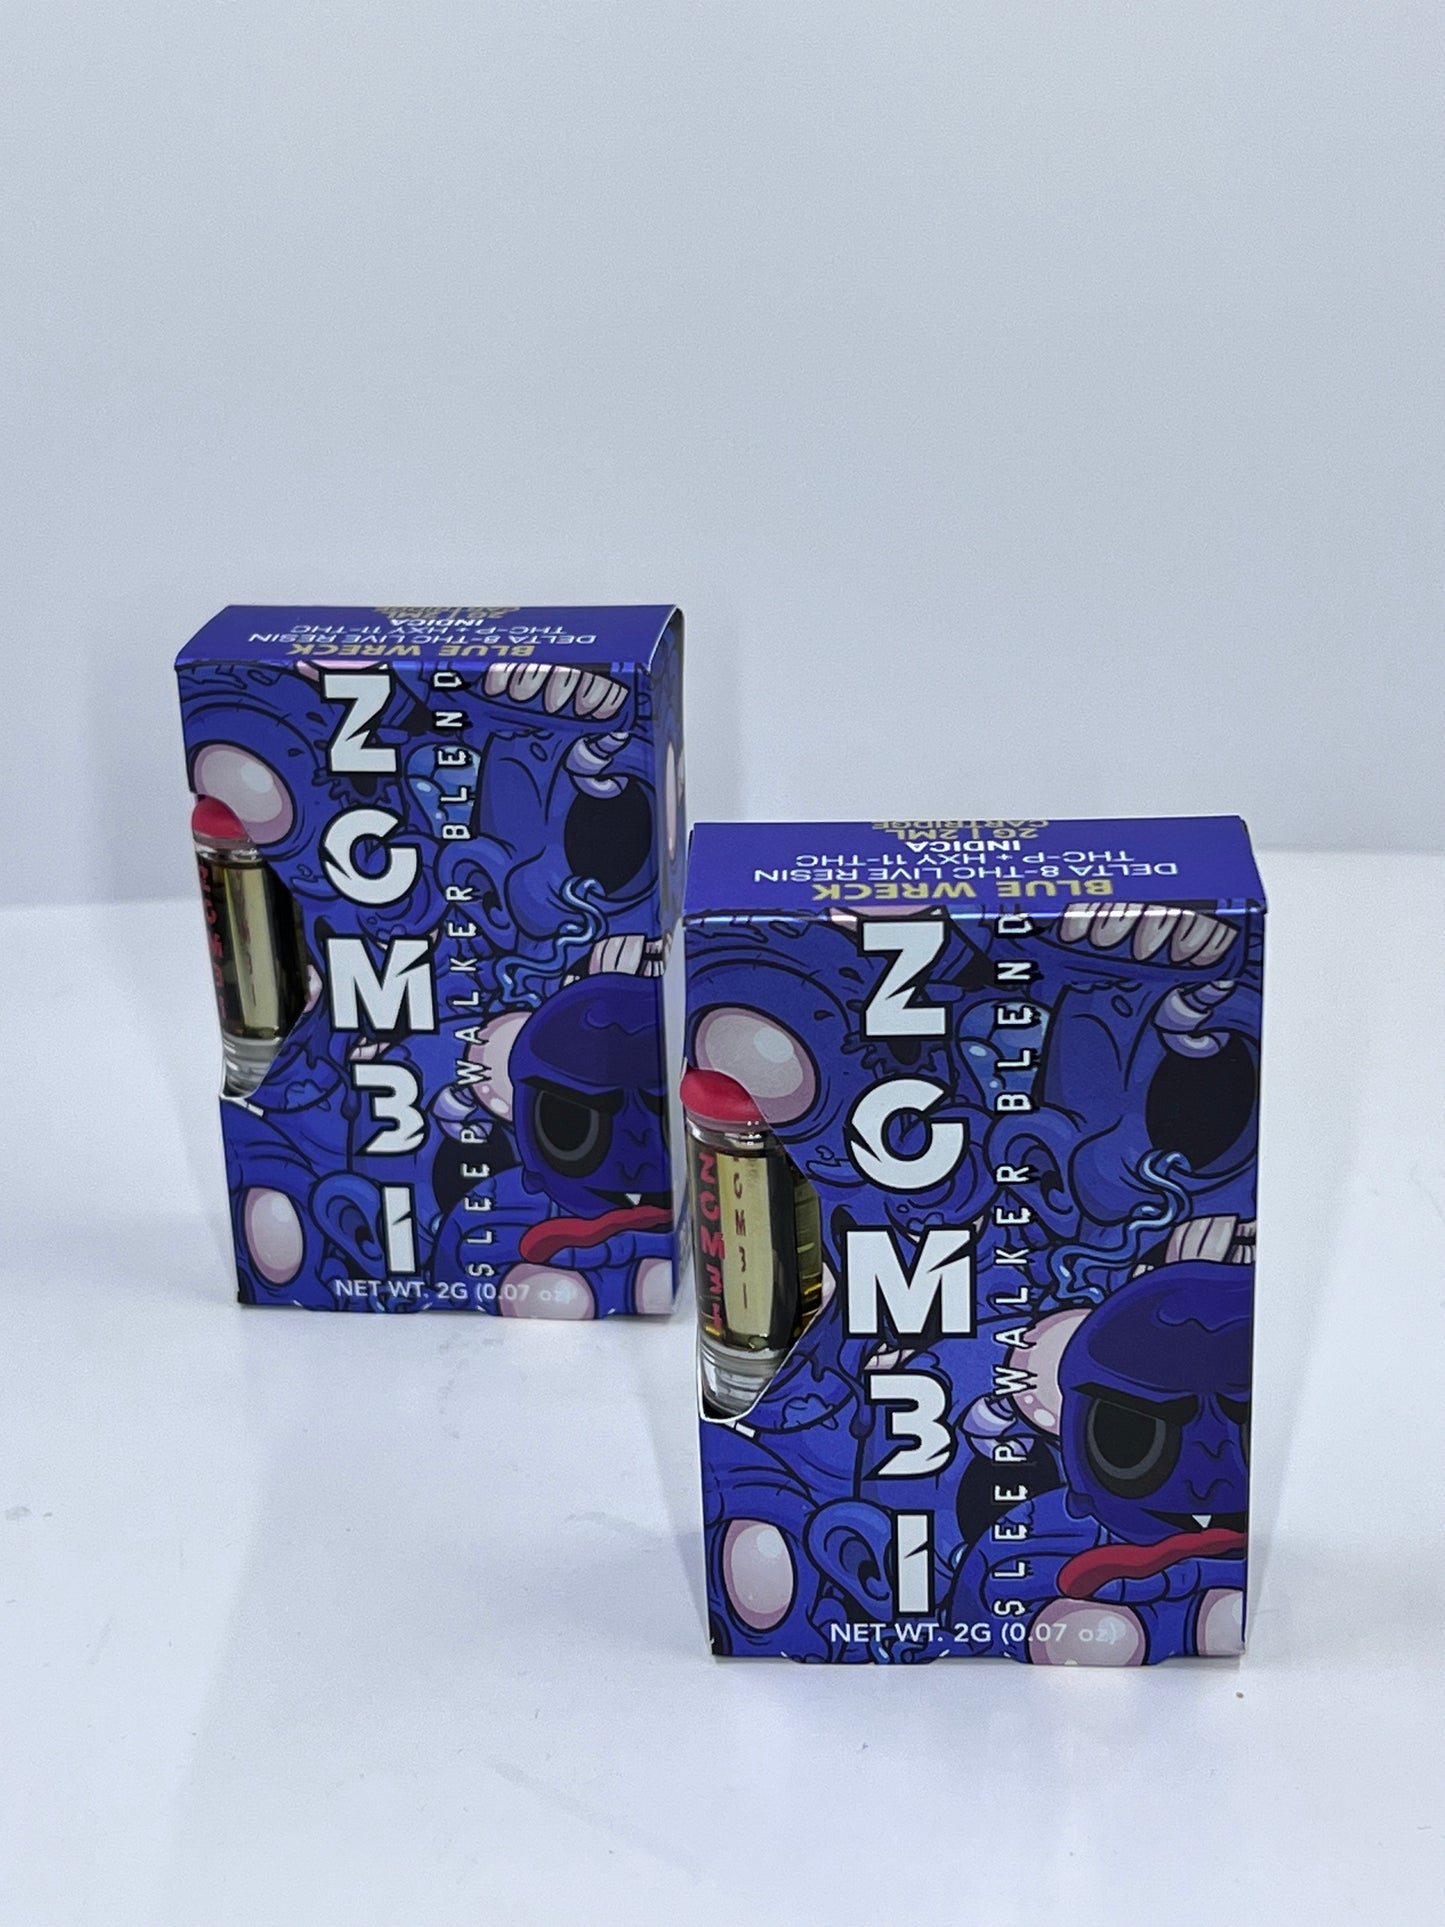 Zombi Blue Wreck 2-Gram Cartridge – Delta-8 THC + THC-P + HXY-11 THC yoga smokes yoga studio, delivery, delivery near me, yoga smokes smoke shop, find smoke shop, head shop near me, yoga studio, headshop, head shop, local smoke shop, psl, psl smoke shop, smoke shop, smokeshop, yoga, yoga studio, dispensary, local dispensary, smokeshop near me, port saint lucie, florida, port st lucie, lounge, life, highlife, love, stoned, highsociety. Yoga Smokes Two Devices